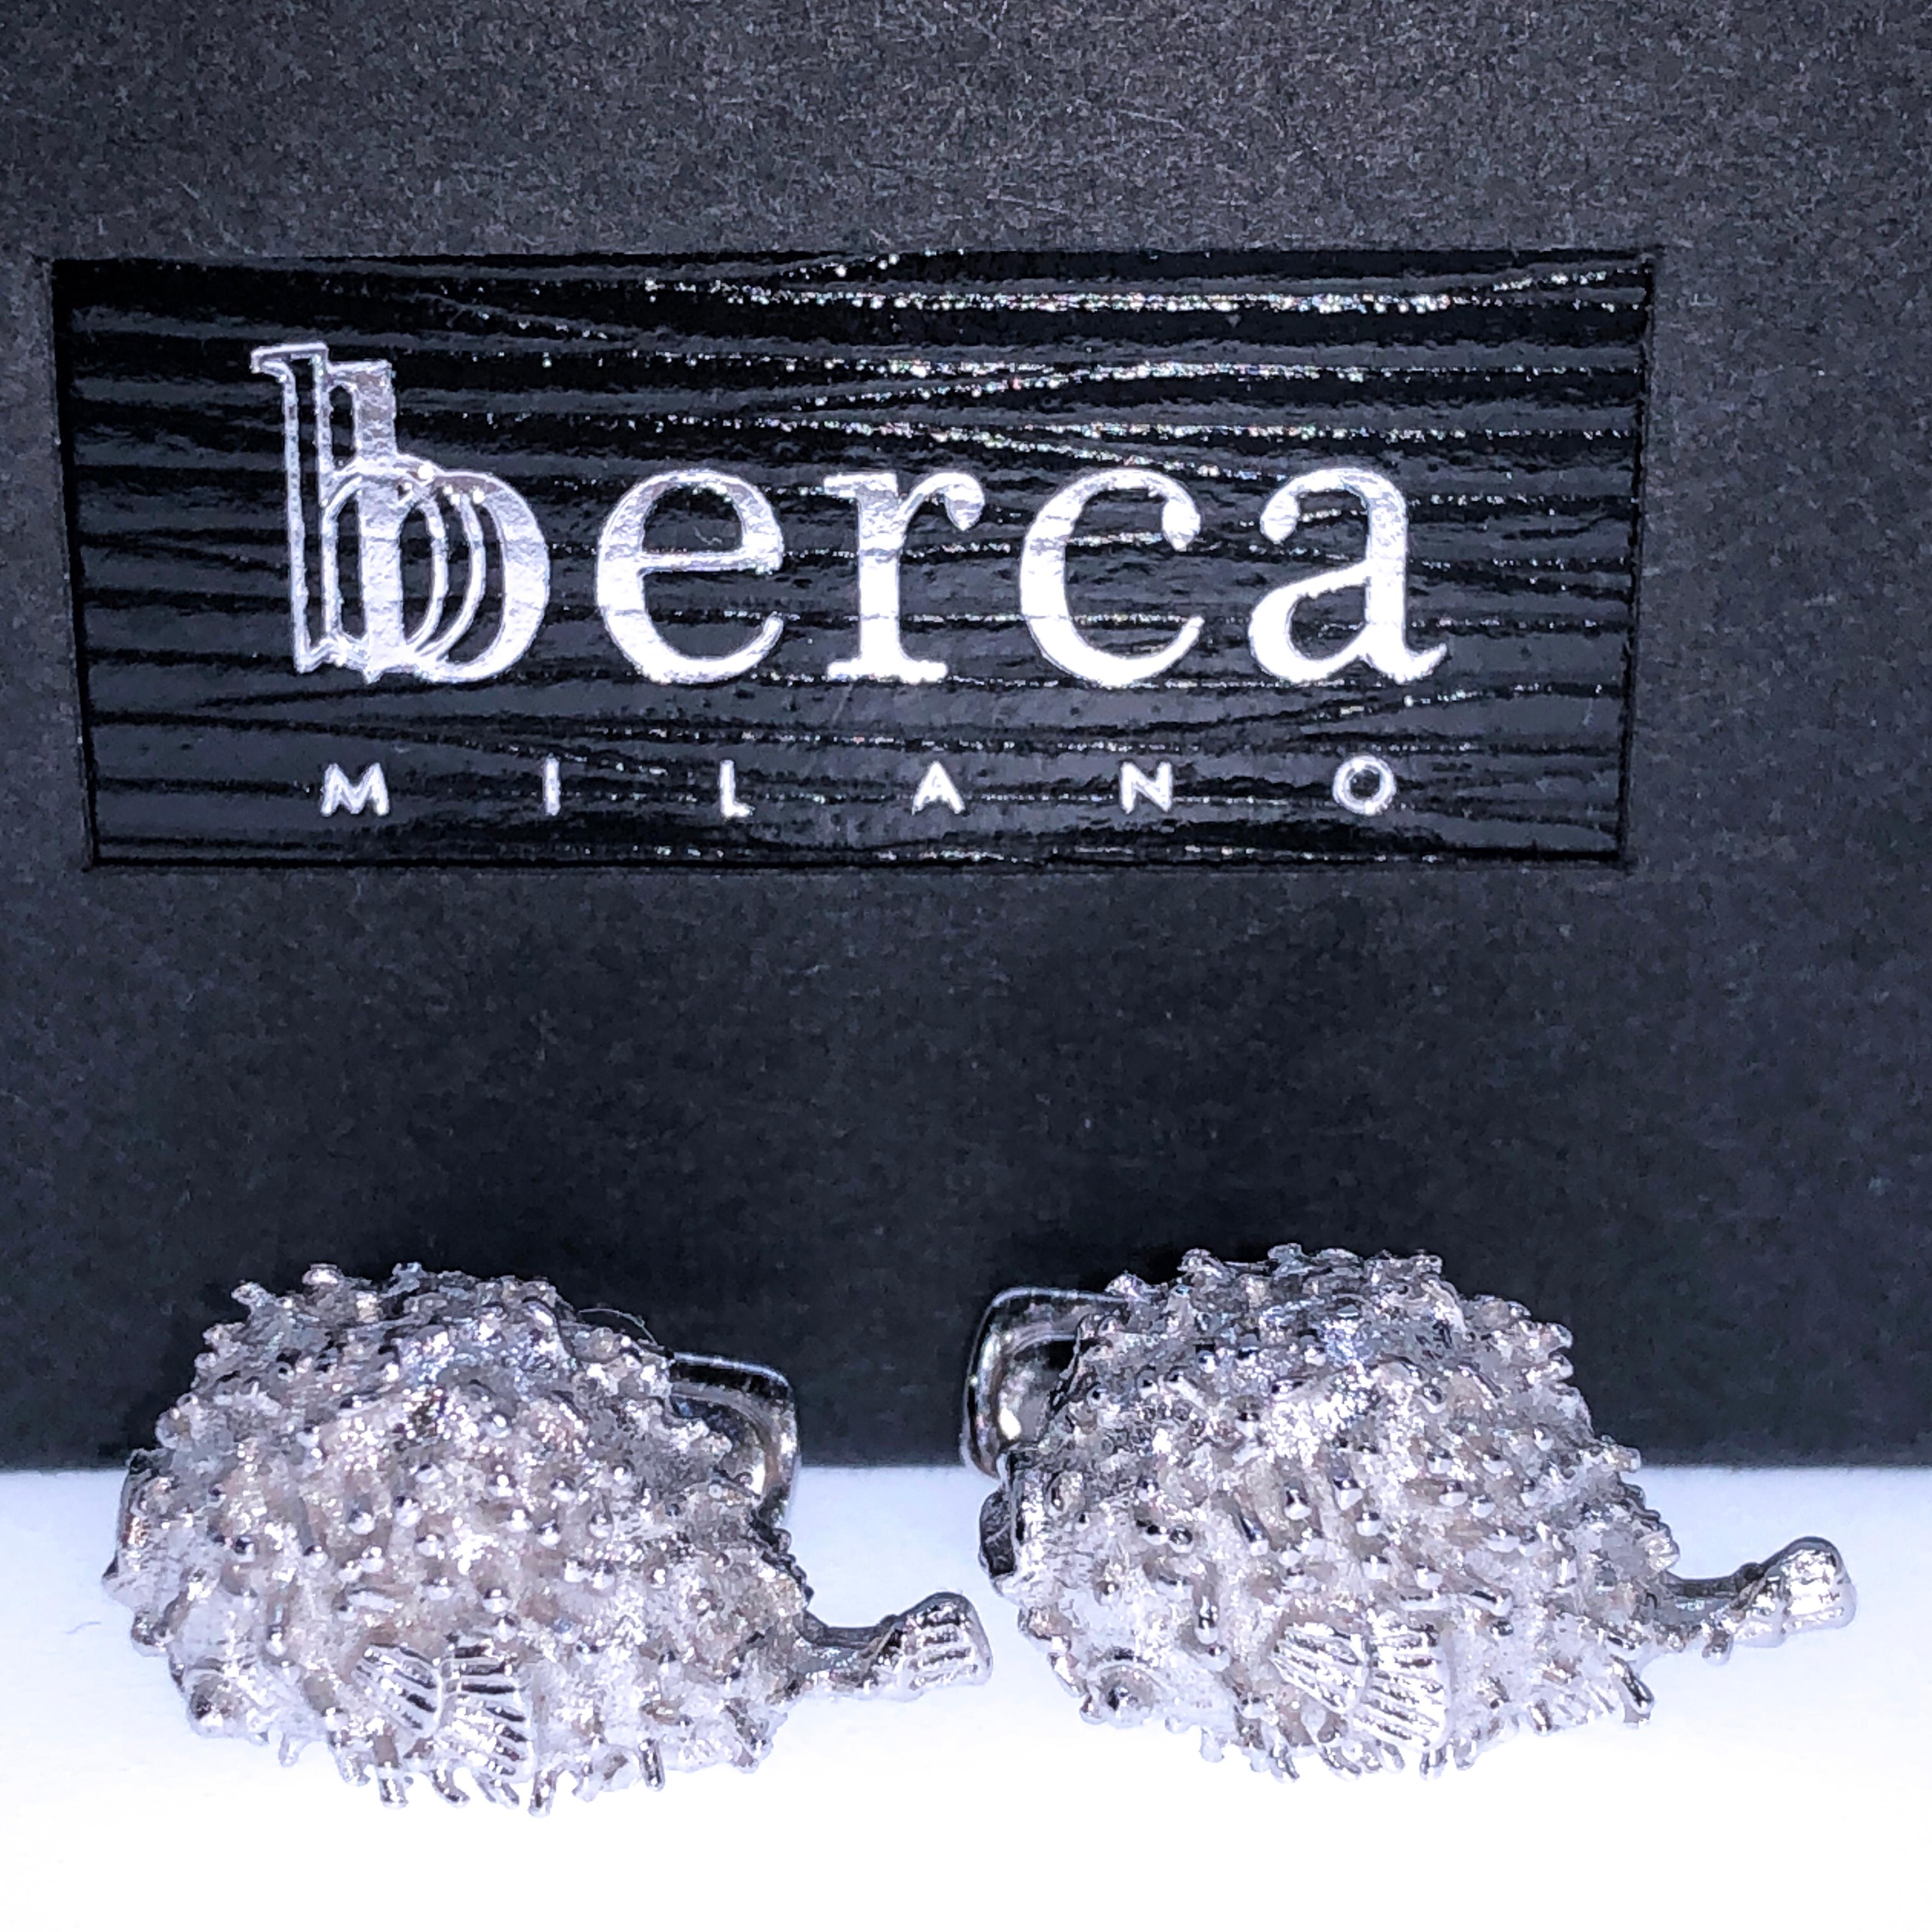 Hand Creafted, Hand Engraved by our expert silversmiths Stonefish Shaped Sterling Silver Cufflinks, T-bar back.
In our fitted smart Black Box.

We are pleased to offer complimentary express shipping to several destinations.
